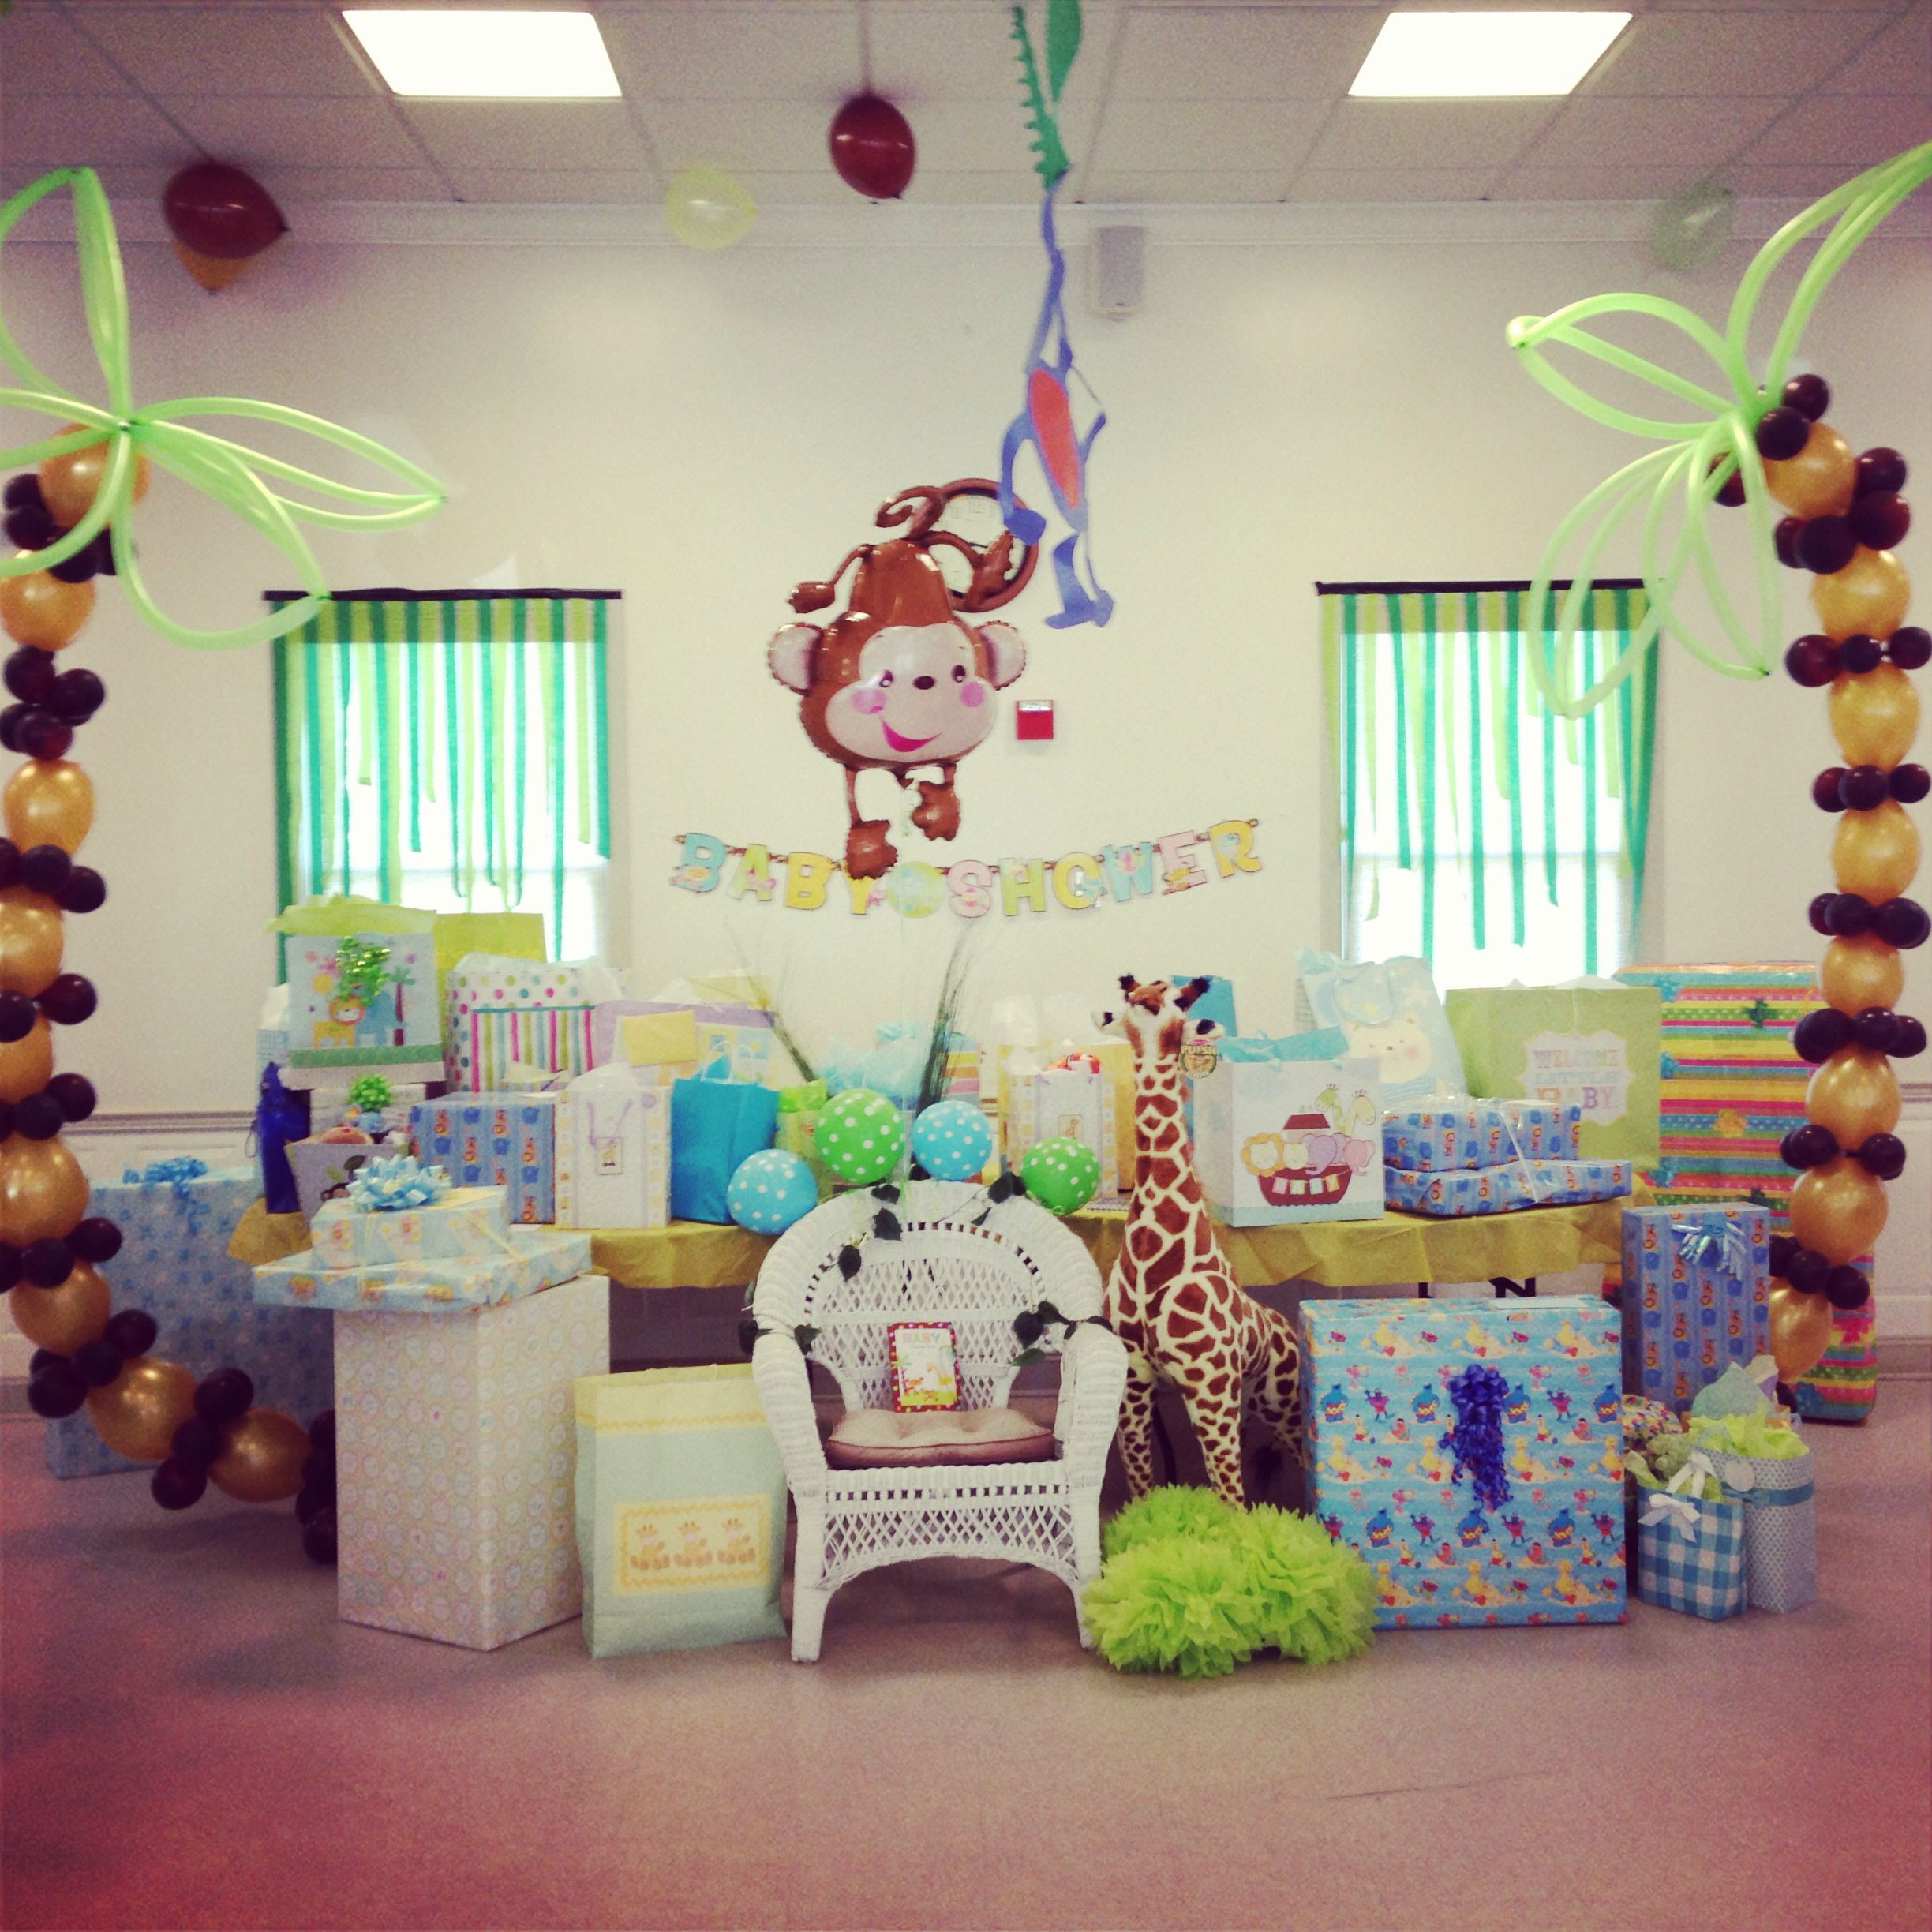 Gift Table Ideas For Baby Shower
 Gift table jungle themed baby shower in 2019